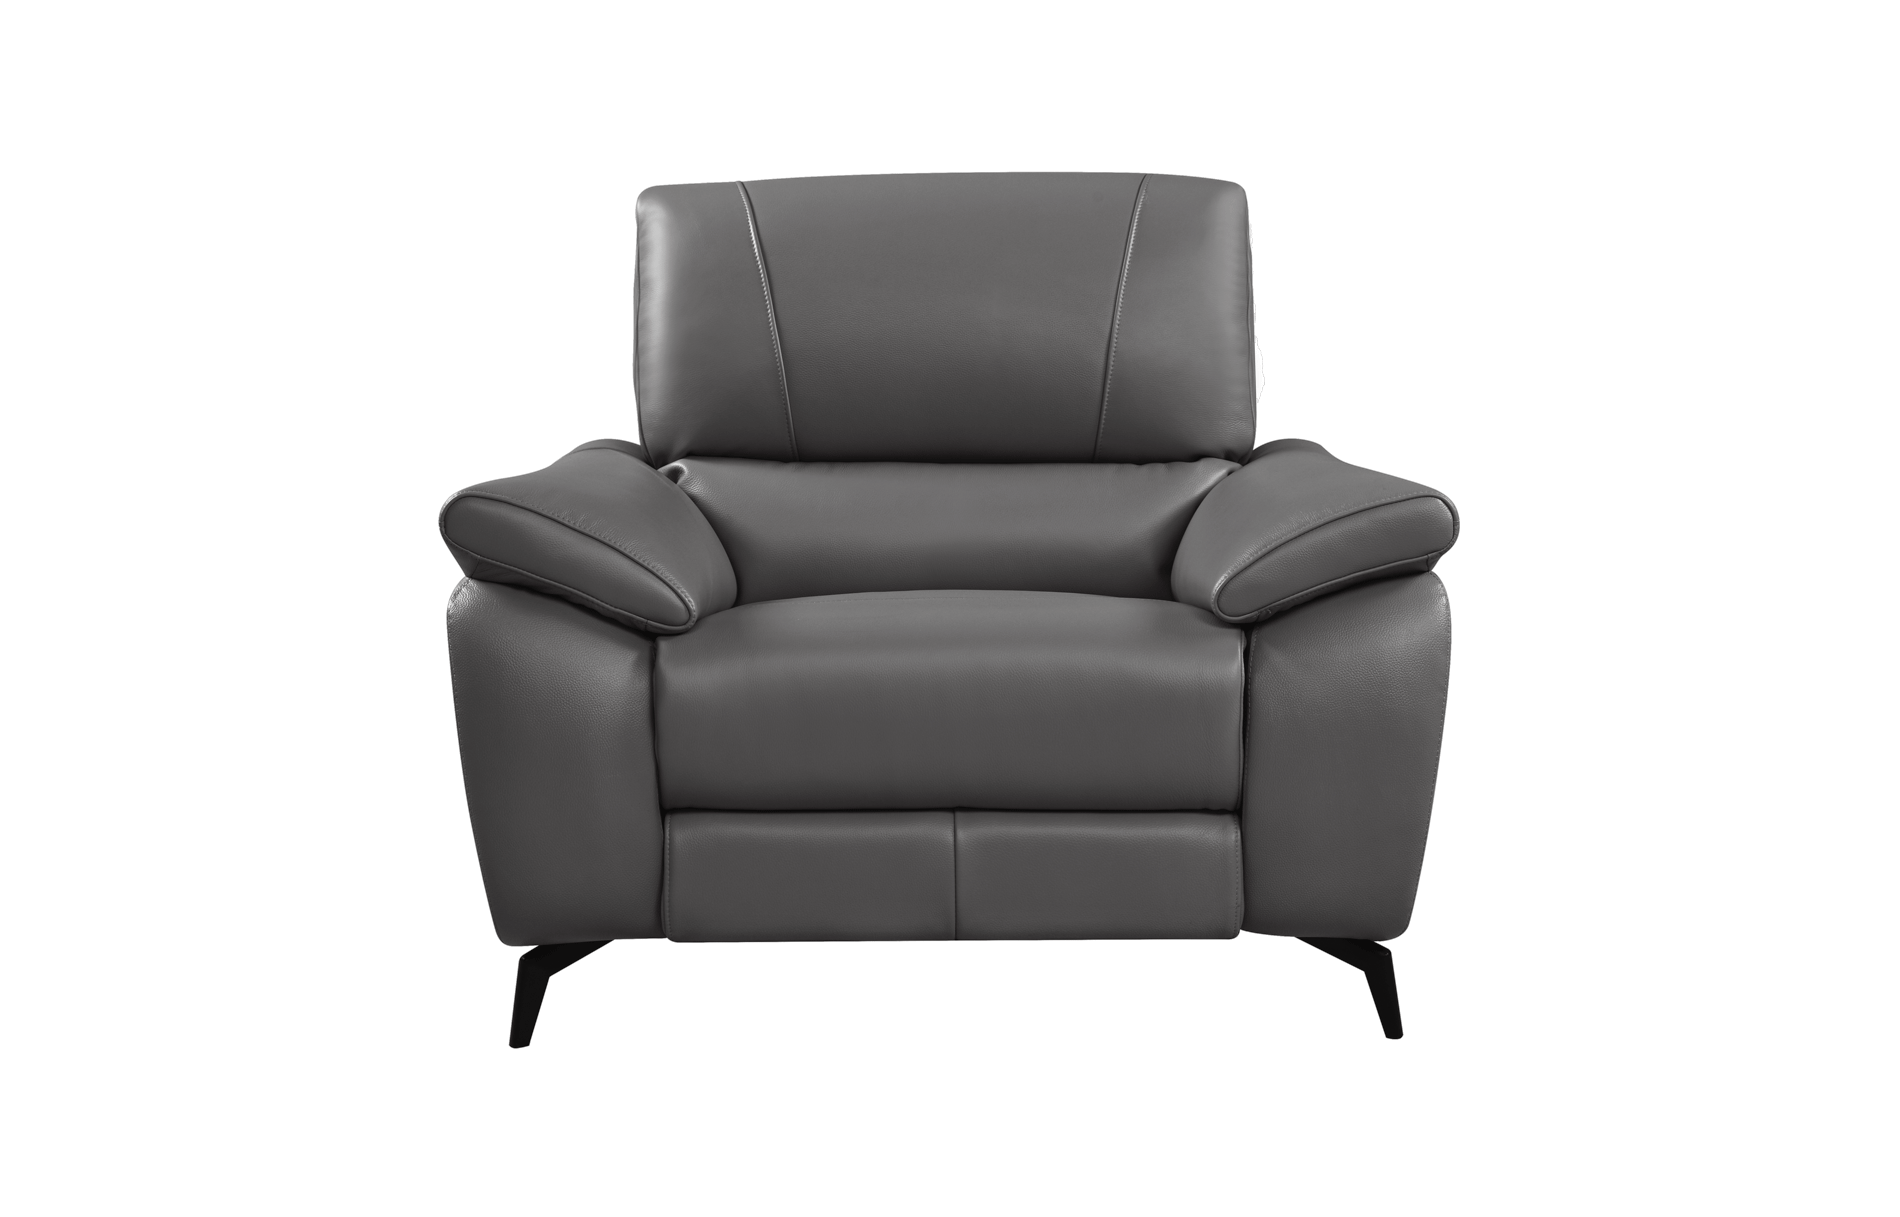 Chair w/ electric recliner